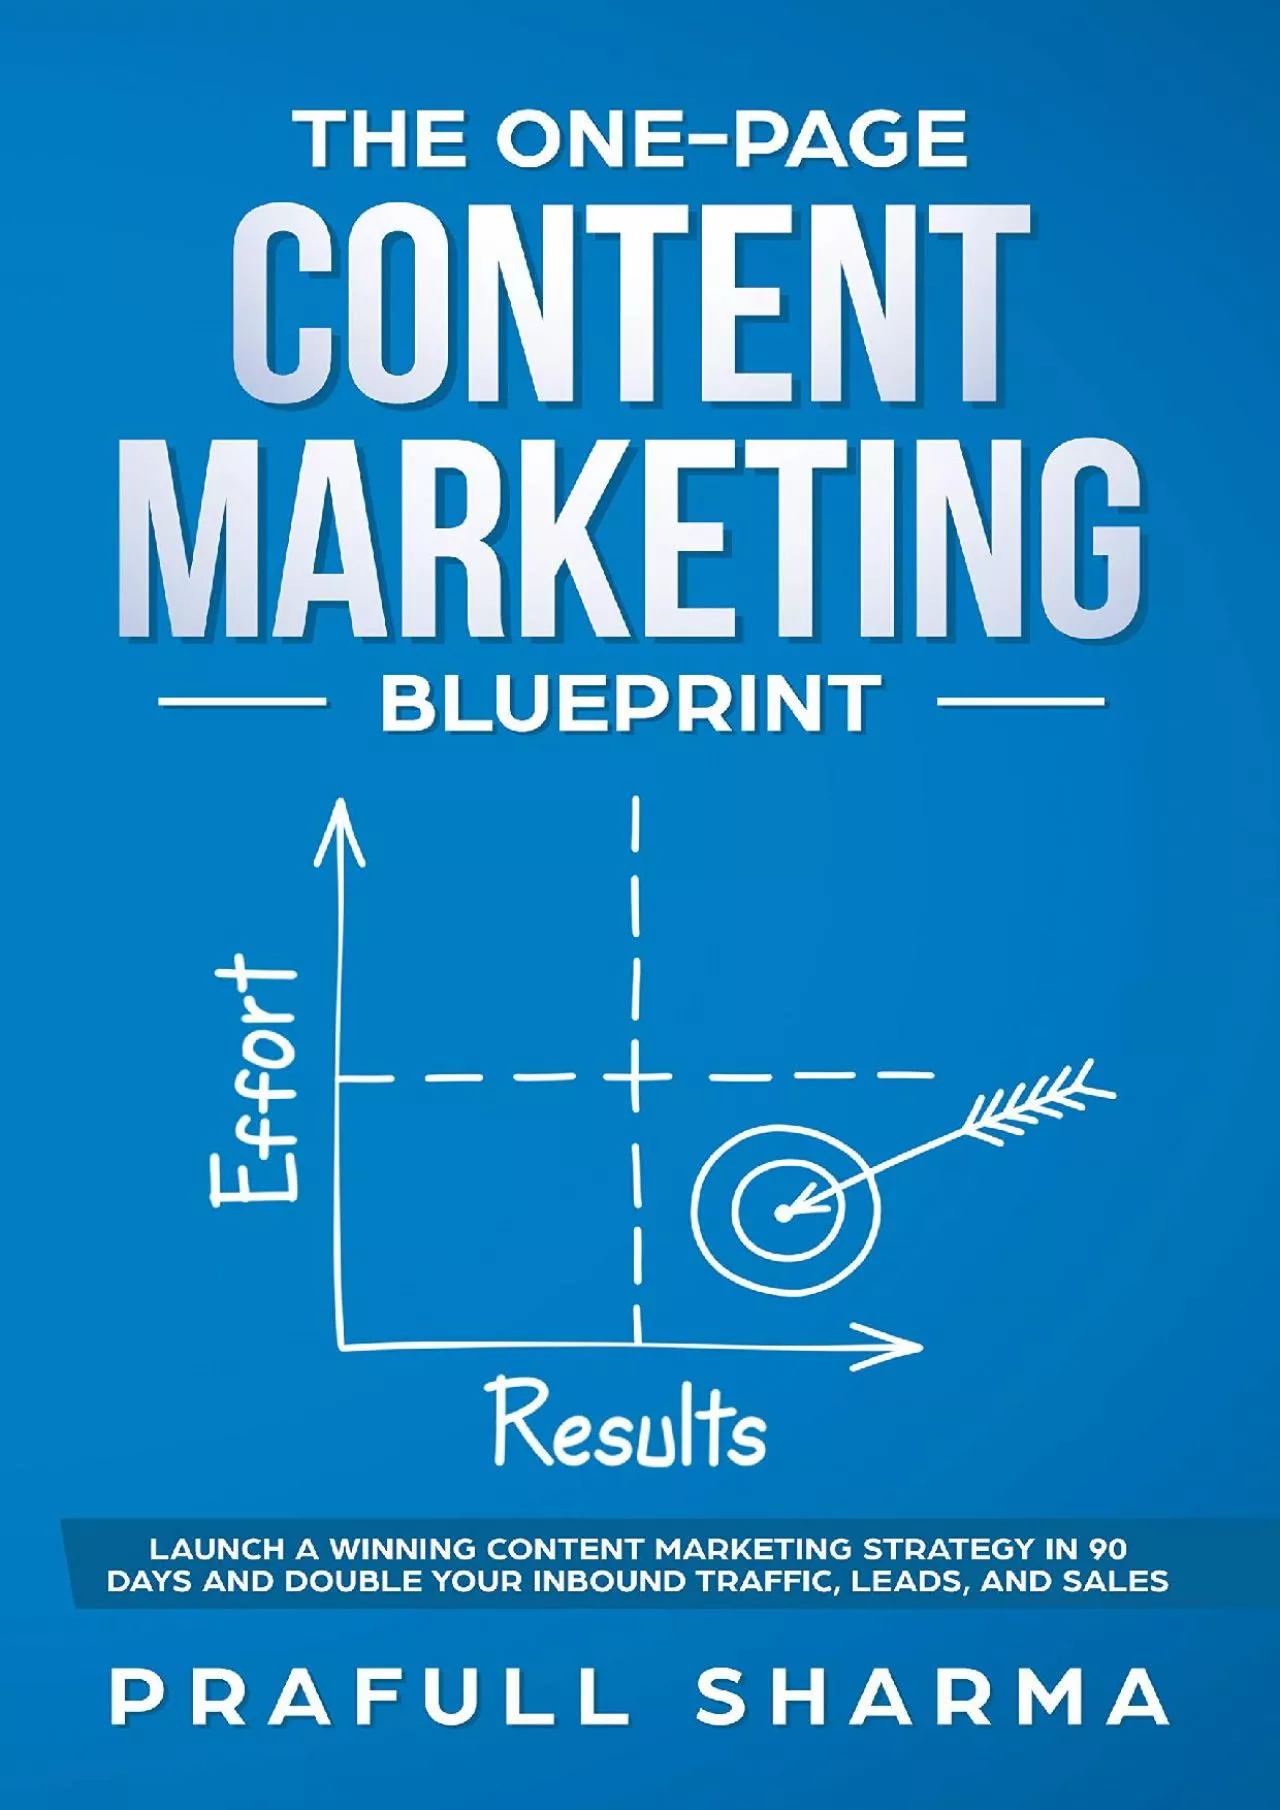 The One-Page Content Marketing Blueprint Step by Step Guide to Launch a Winning Content